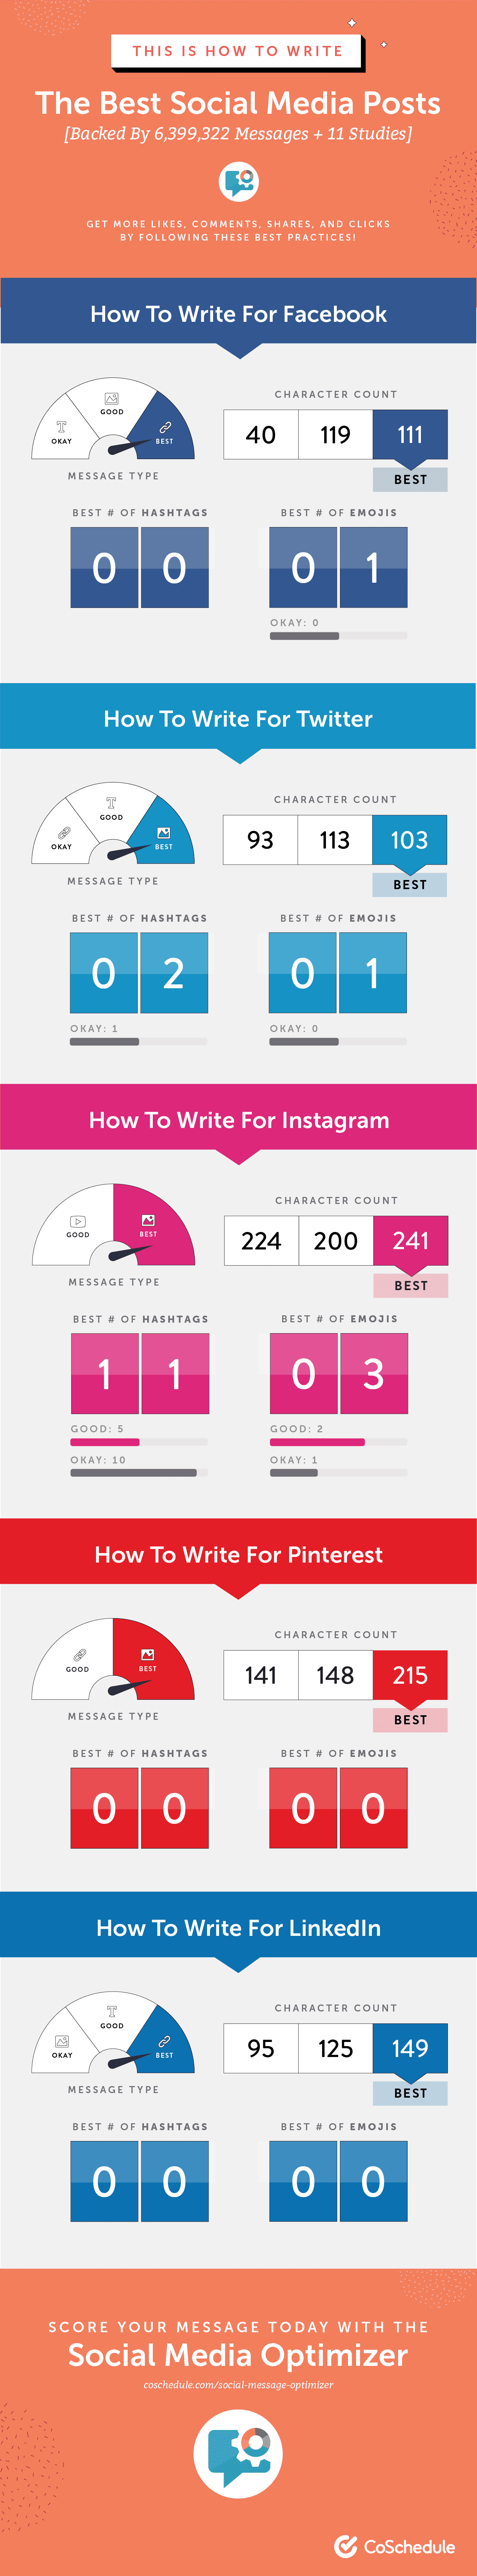 How to write the best social media posts.